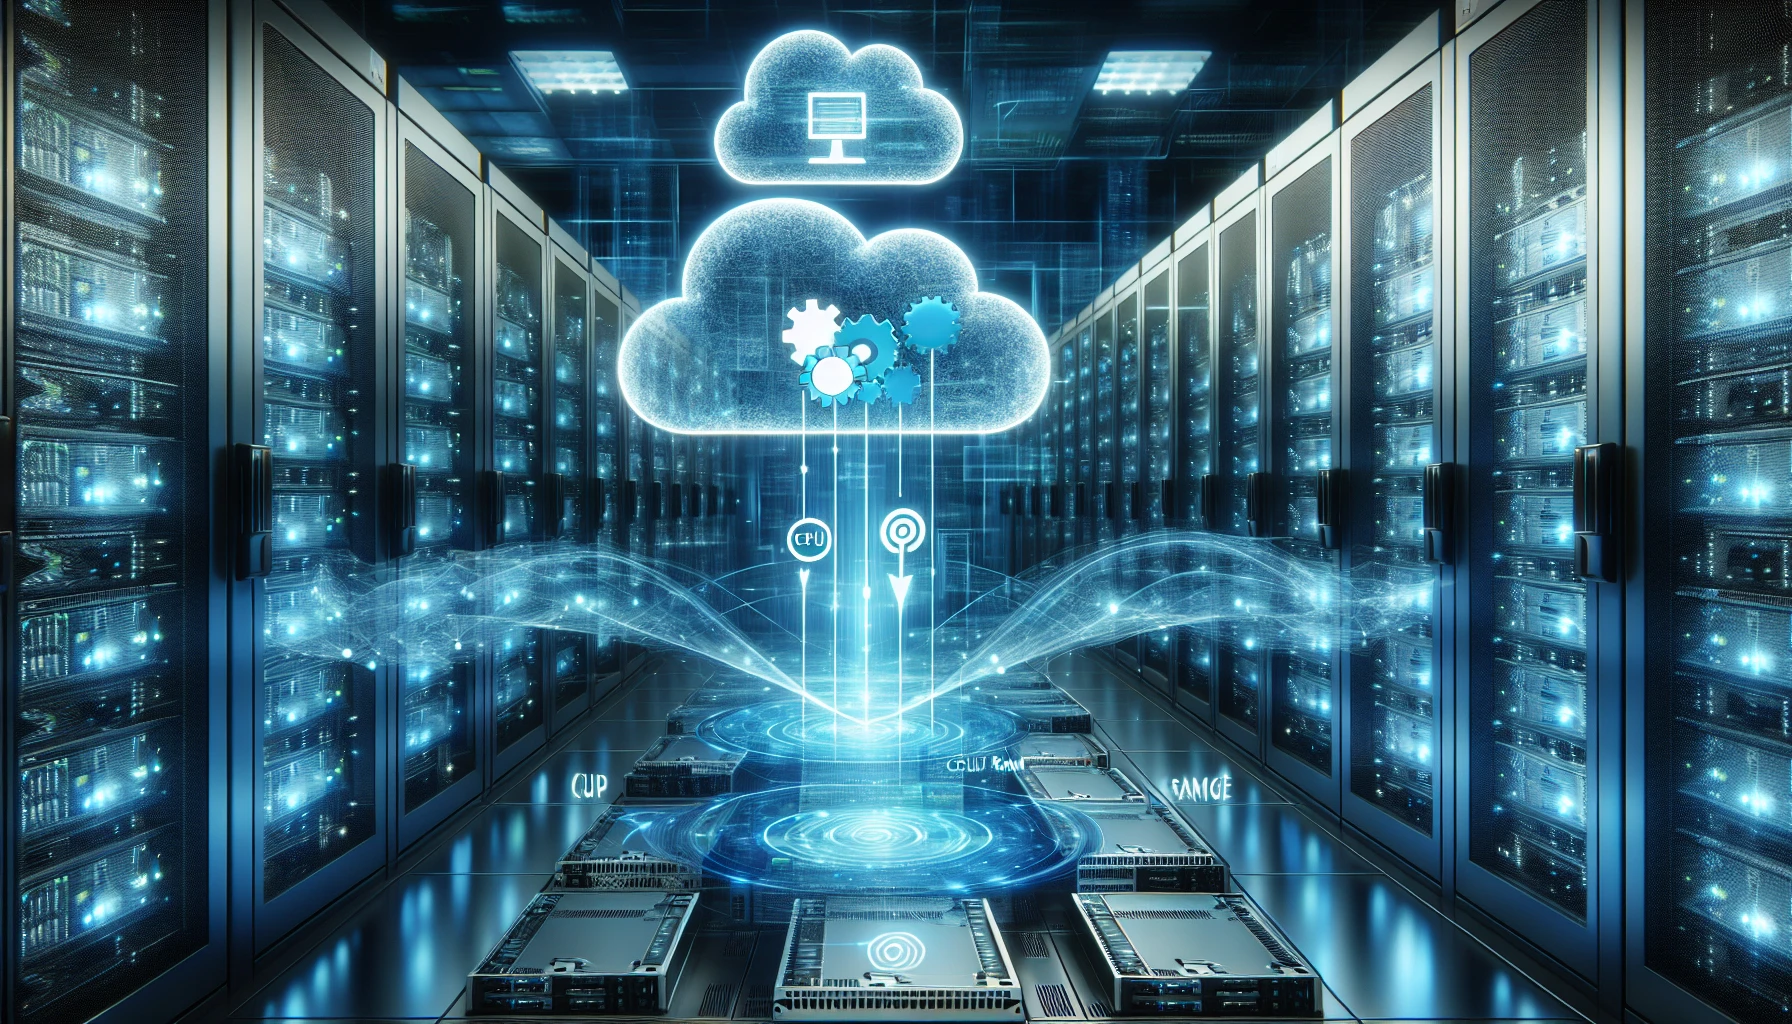 Illustration of virtualization technology in cloud computing